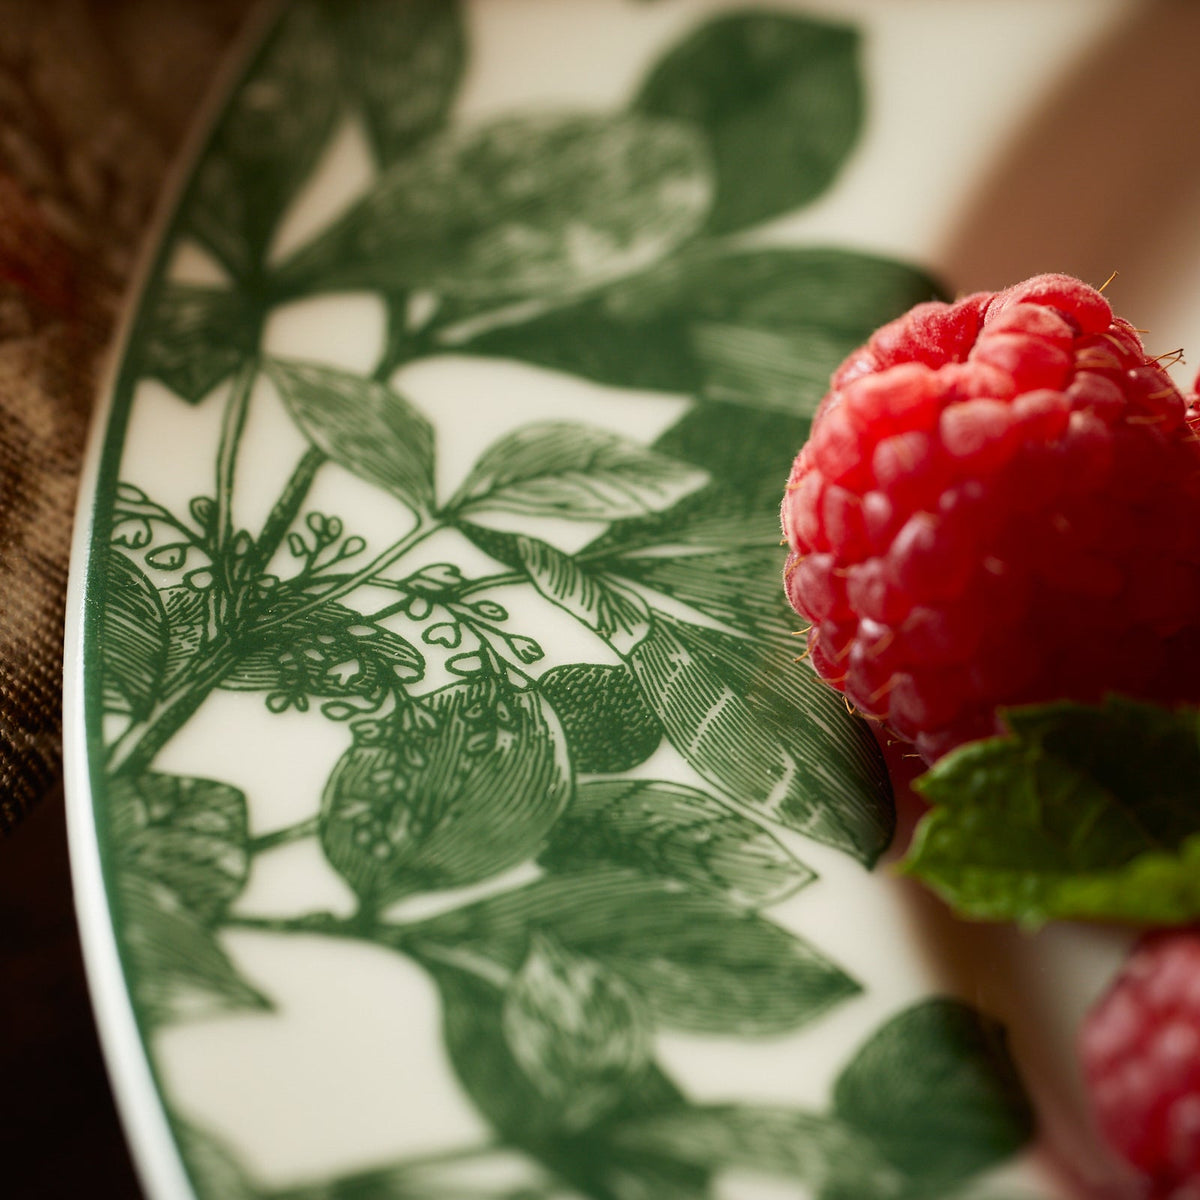 A Caskata Arbor Green Salad Plate adorned with raspberries and mint from the Arbor collection, exuding a vintage romance aesthetic.